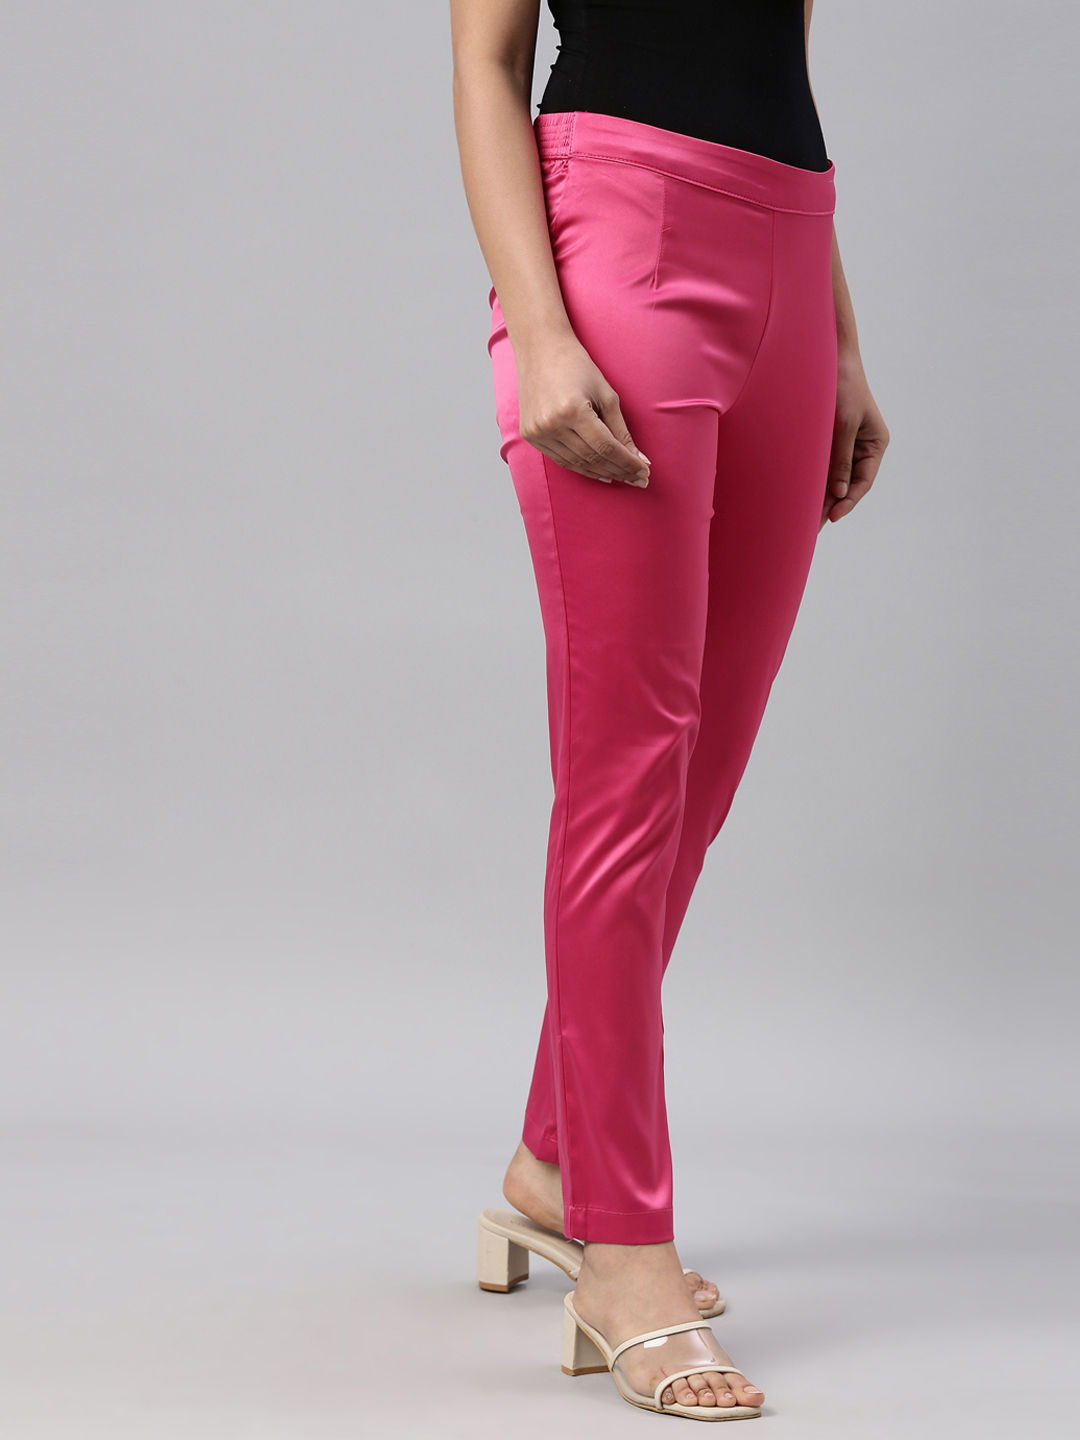 Hot Pink Pants Outfits For Women (131 ideas & outfits) | Lookastic